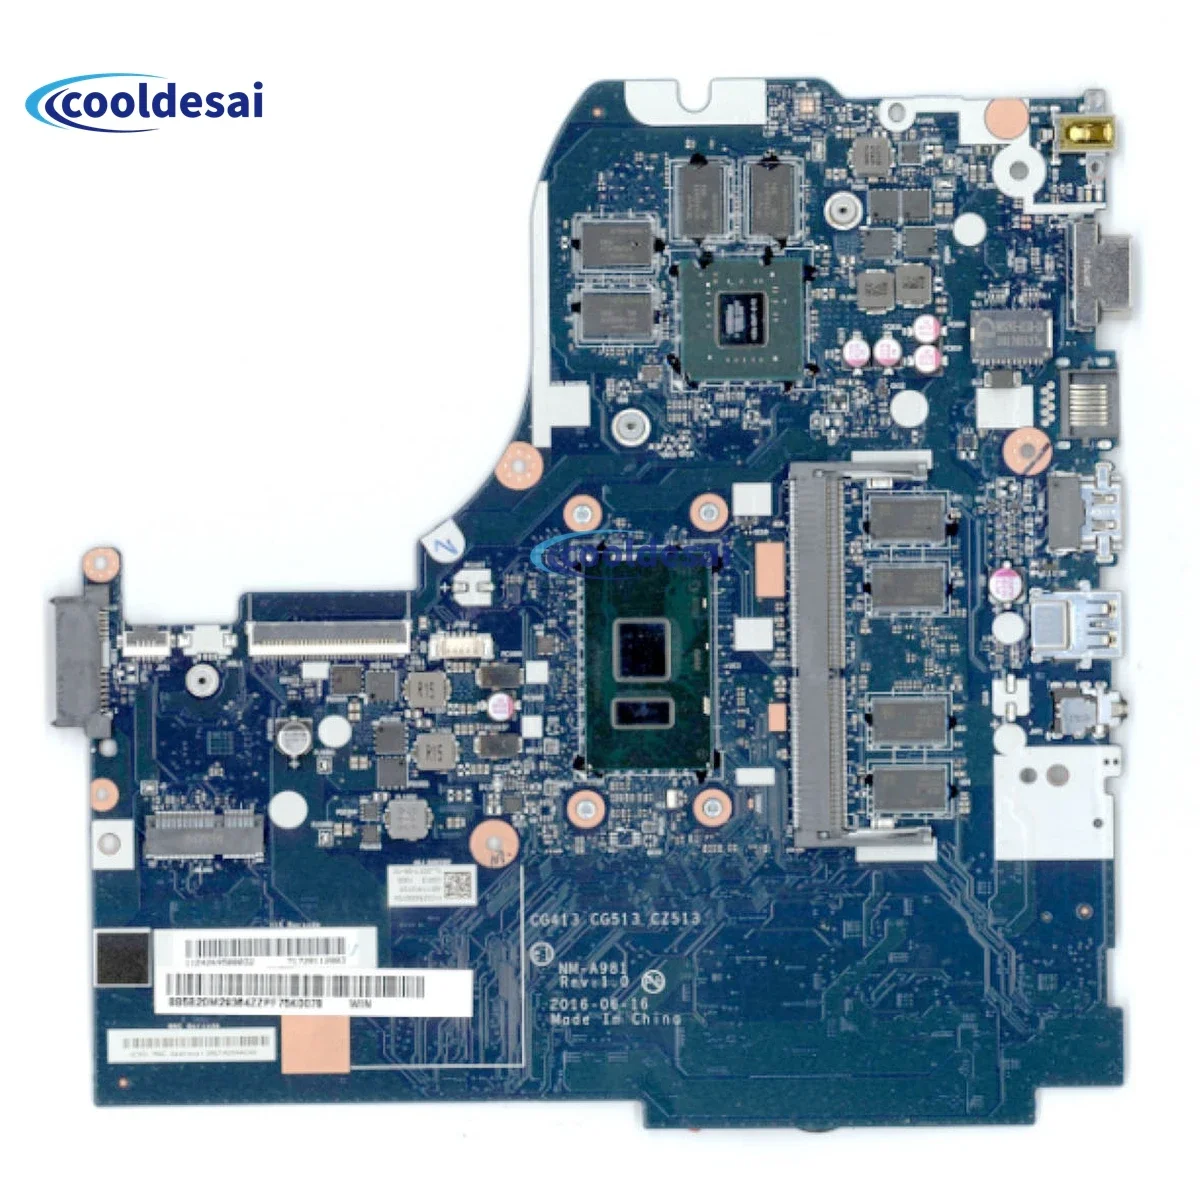 

NM-A981 NM-A751 For Lenovo 310-15IKB 510-15IKB Laptop Motherboard With I3/I5/I7 7th CPU GT920M 2G RAM 4G 100% Test Work